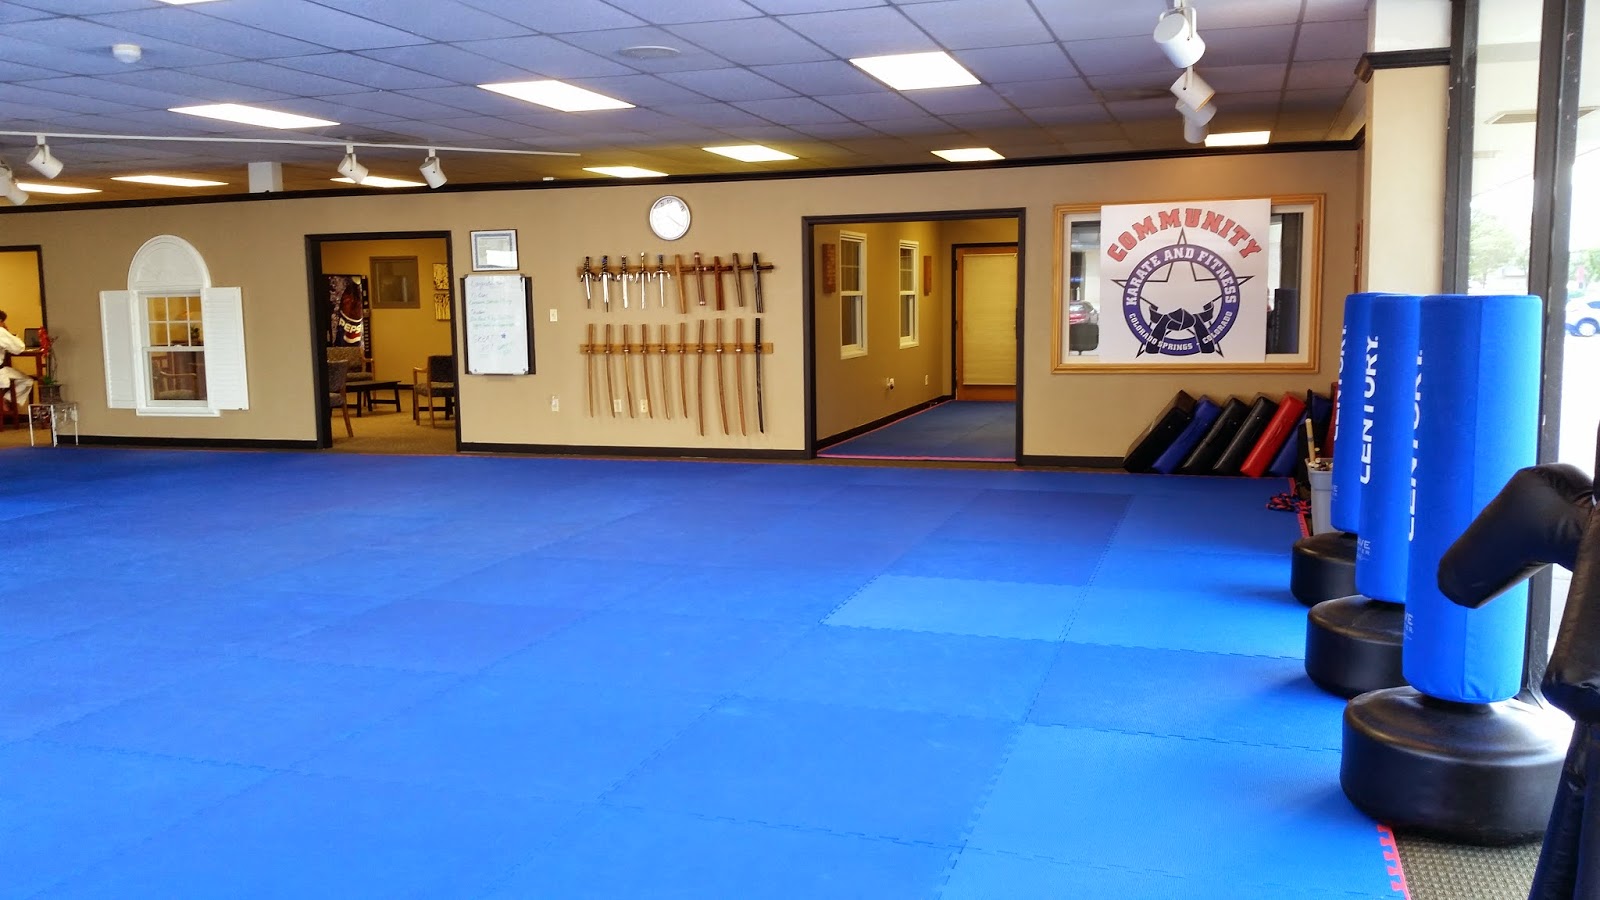 Community Karate and Fitness: Karate for Kids and Families in Colorado